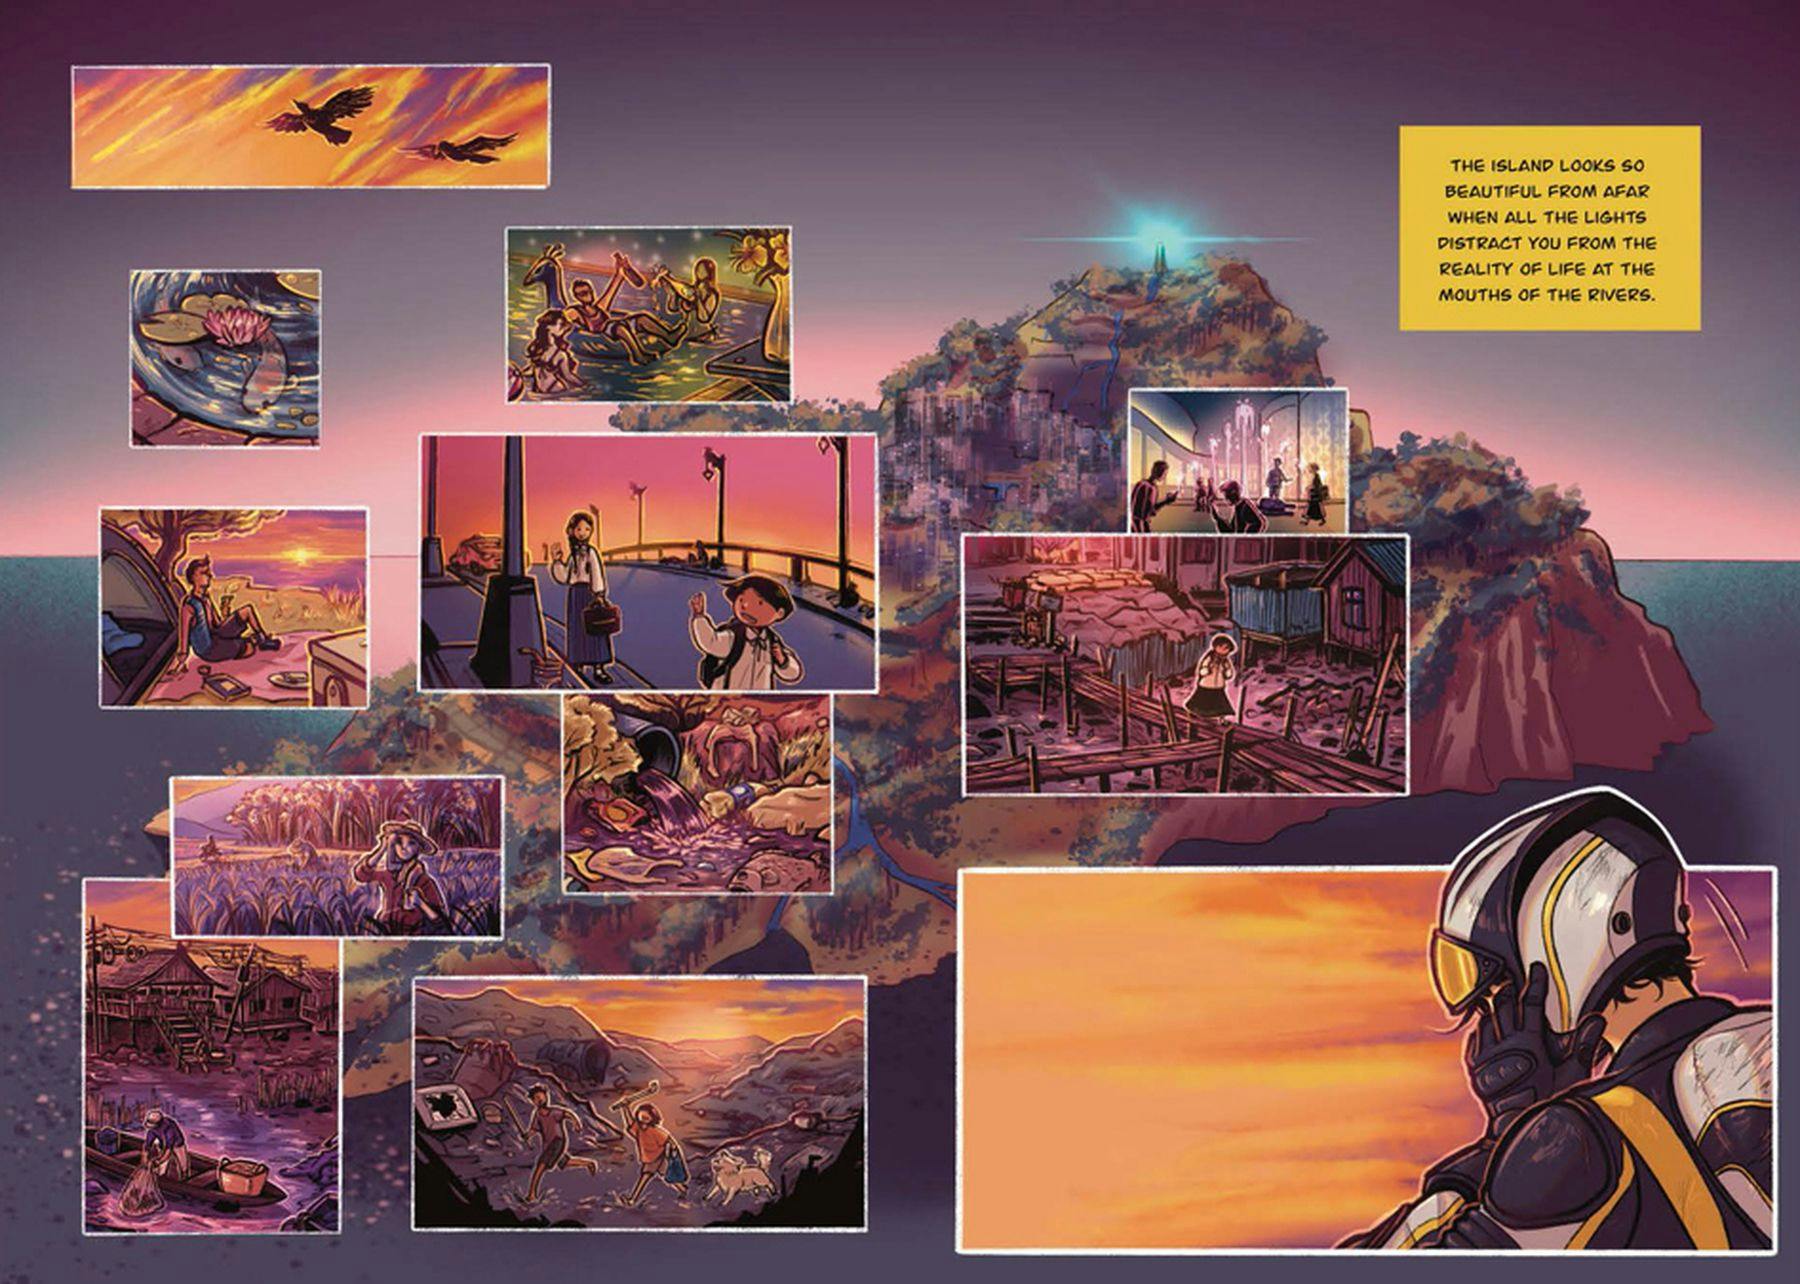 A comic book illustration of an island with a blue light at the tip against a pink sunset. The image is overlayed with smaller images in boxes which show different scenes of life on the island. The text reads: The island looks so beautiful from afar when all the lights distract you from the reality of life at the mouths of the rivers.